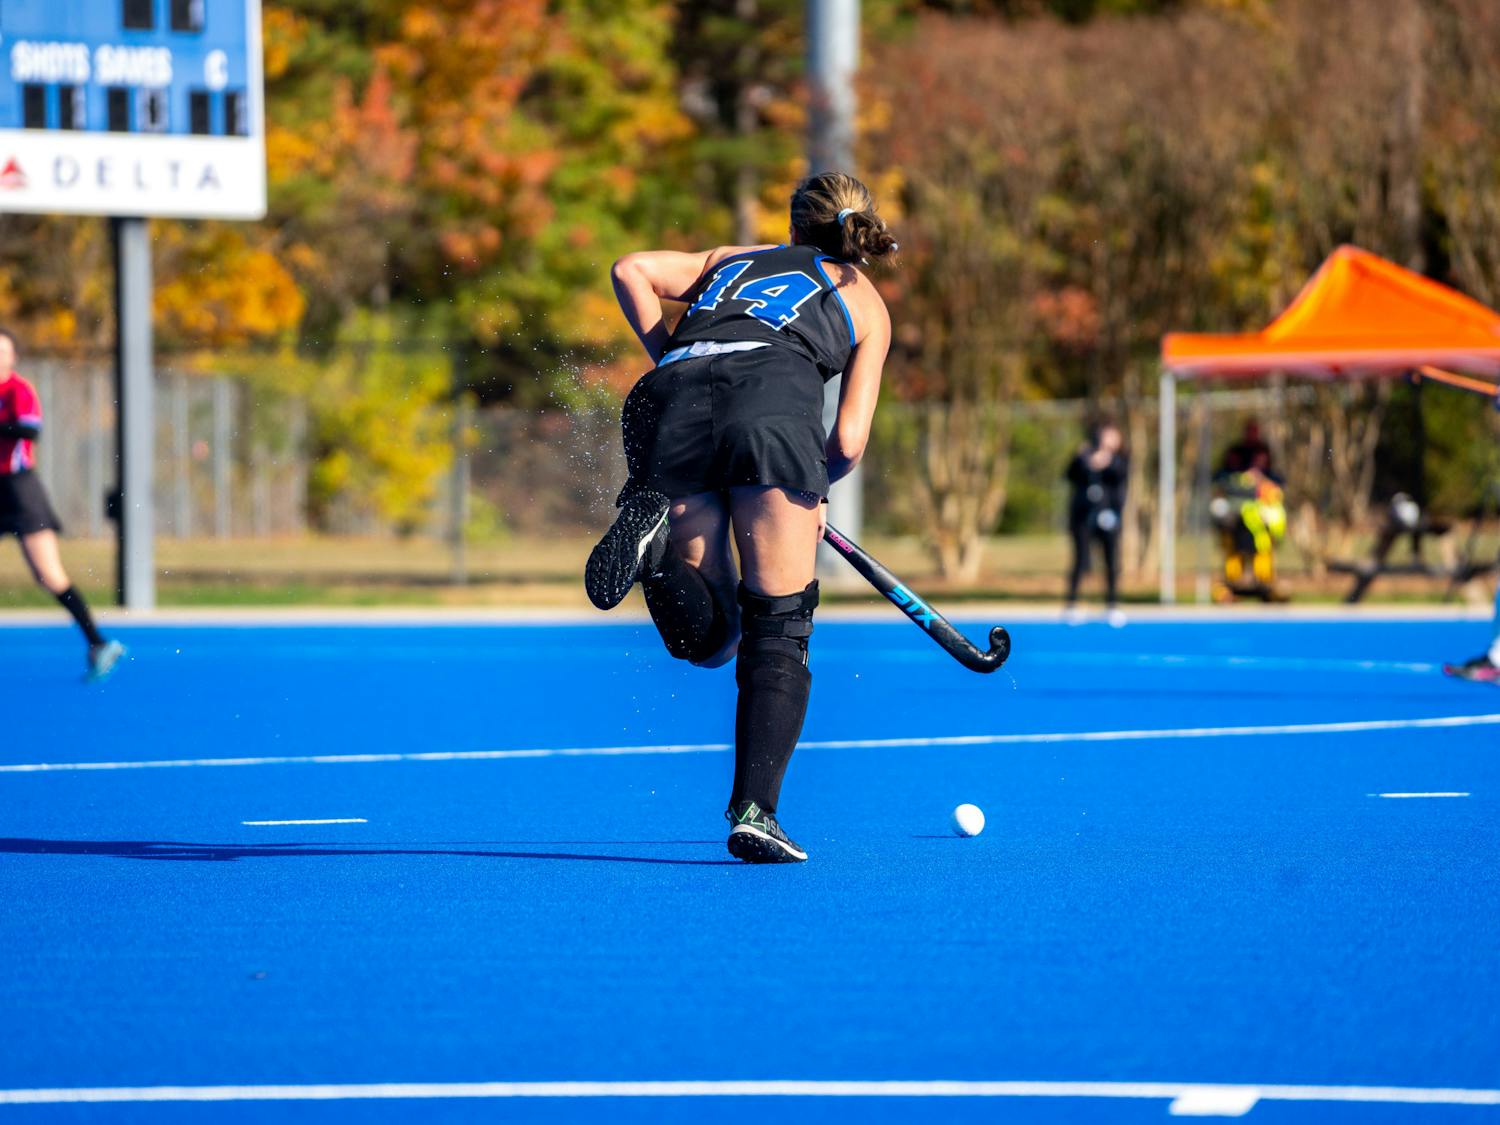 Sophomore forward Alaina McVeigh leads the Blue Devils with 17 goals this season.